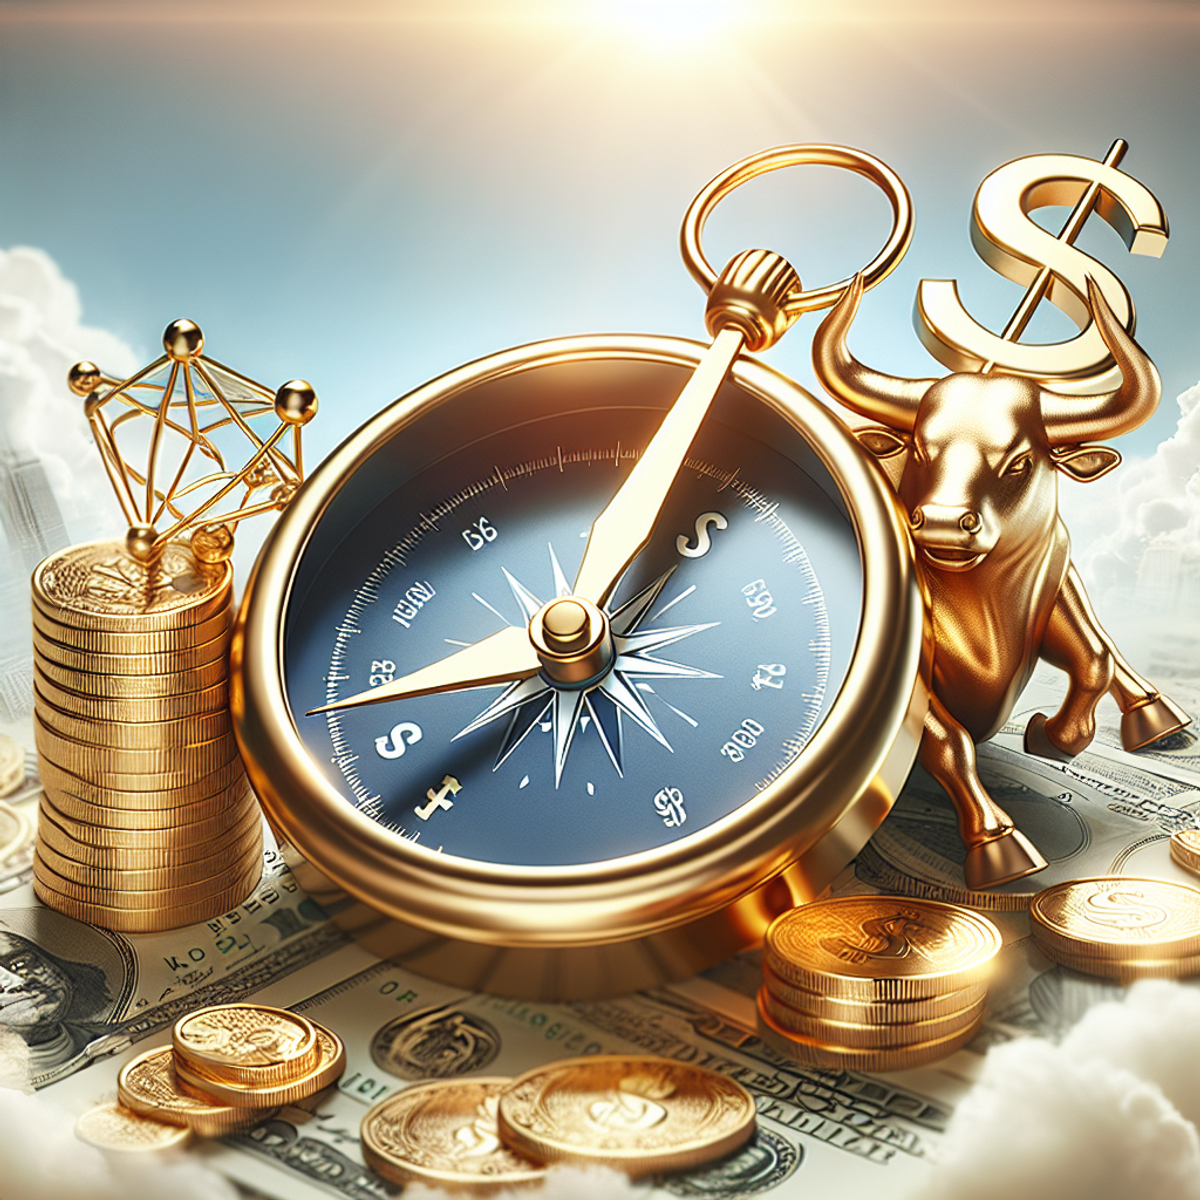 a shiny gilded compass with a needle pointing towards symbols representing prosperity in finances, including a bull, gold coins, and a dollar sign, under a bright sky.